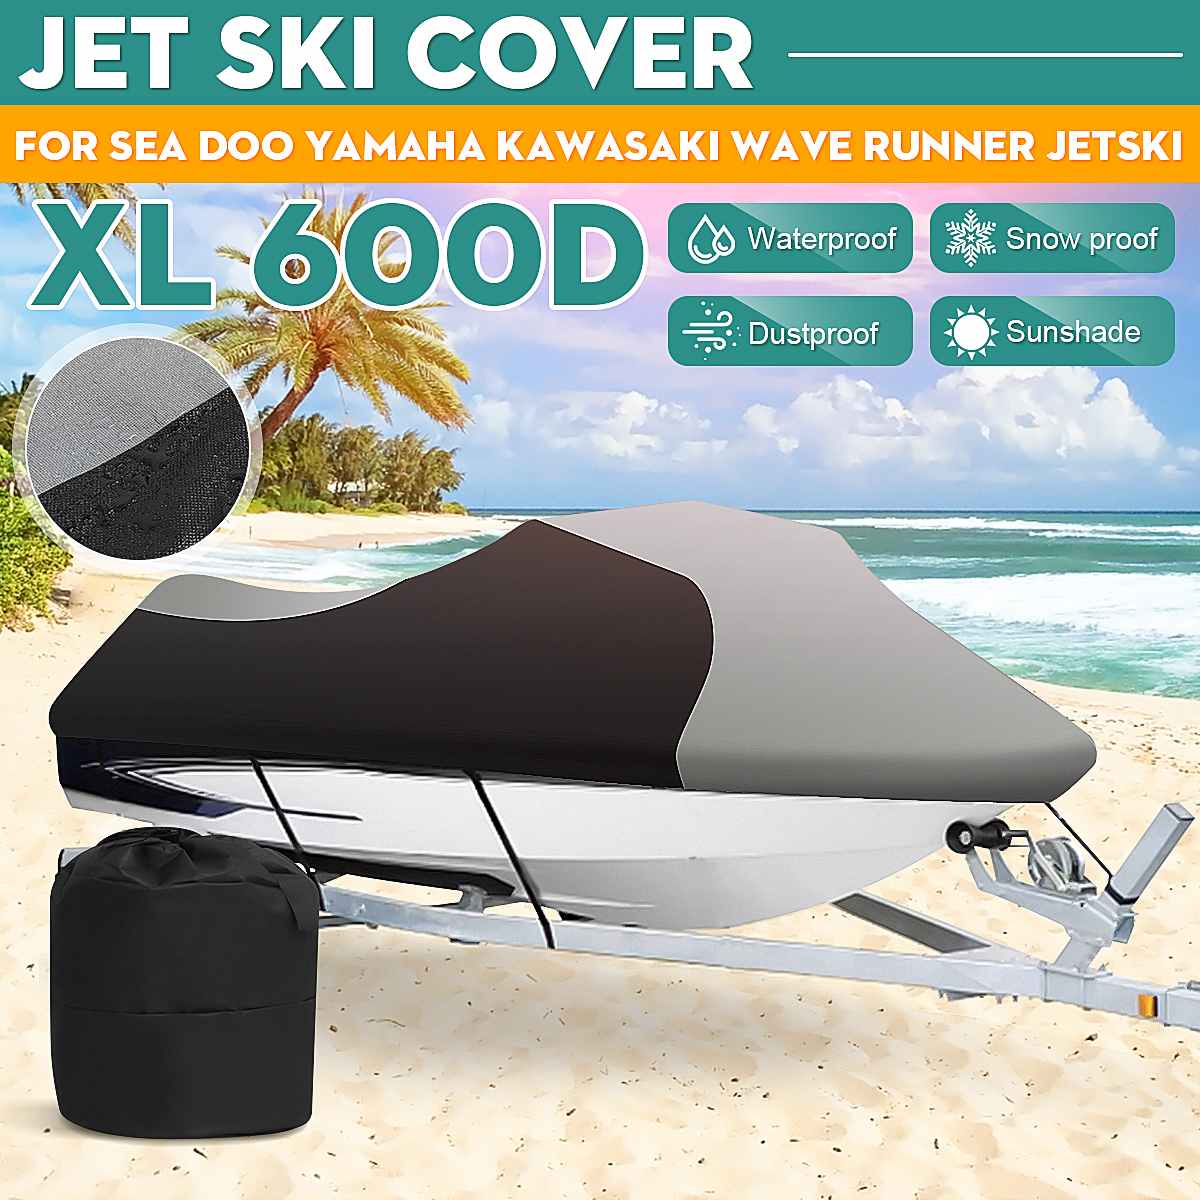 600D Waterproof Trailerable Boat Cover Jet Ski Outboard Motor Hood Cover Engine Protector Oxford Cloth 30cmx18cm 380cm x 260cm - lebenoutdoors